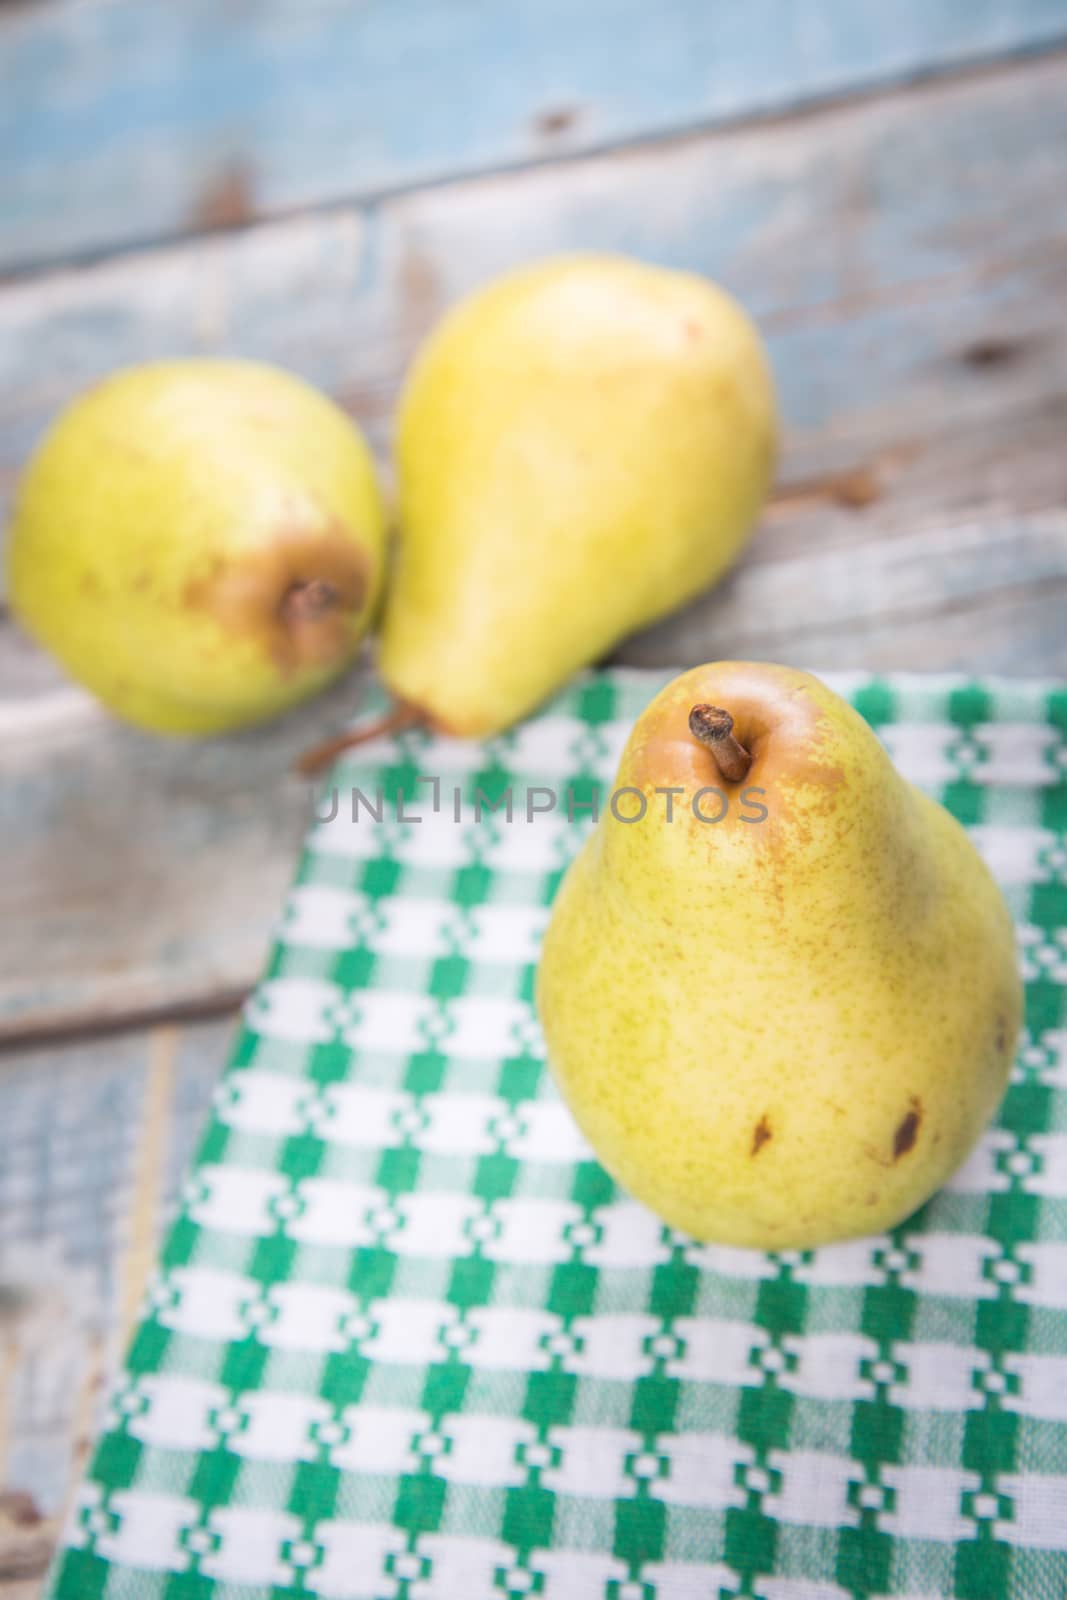 pears by pil76